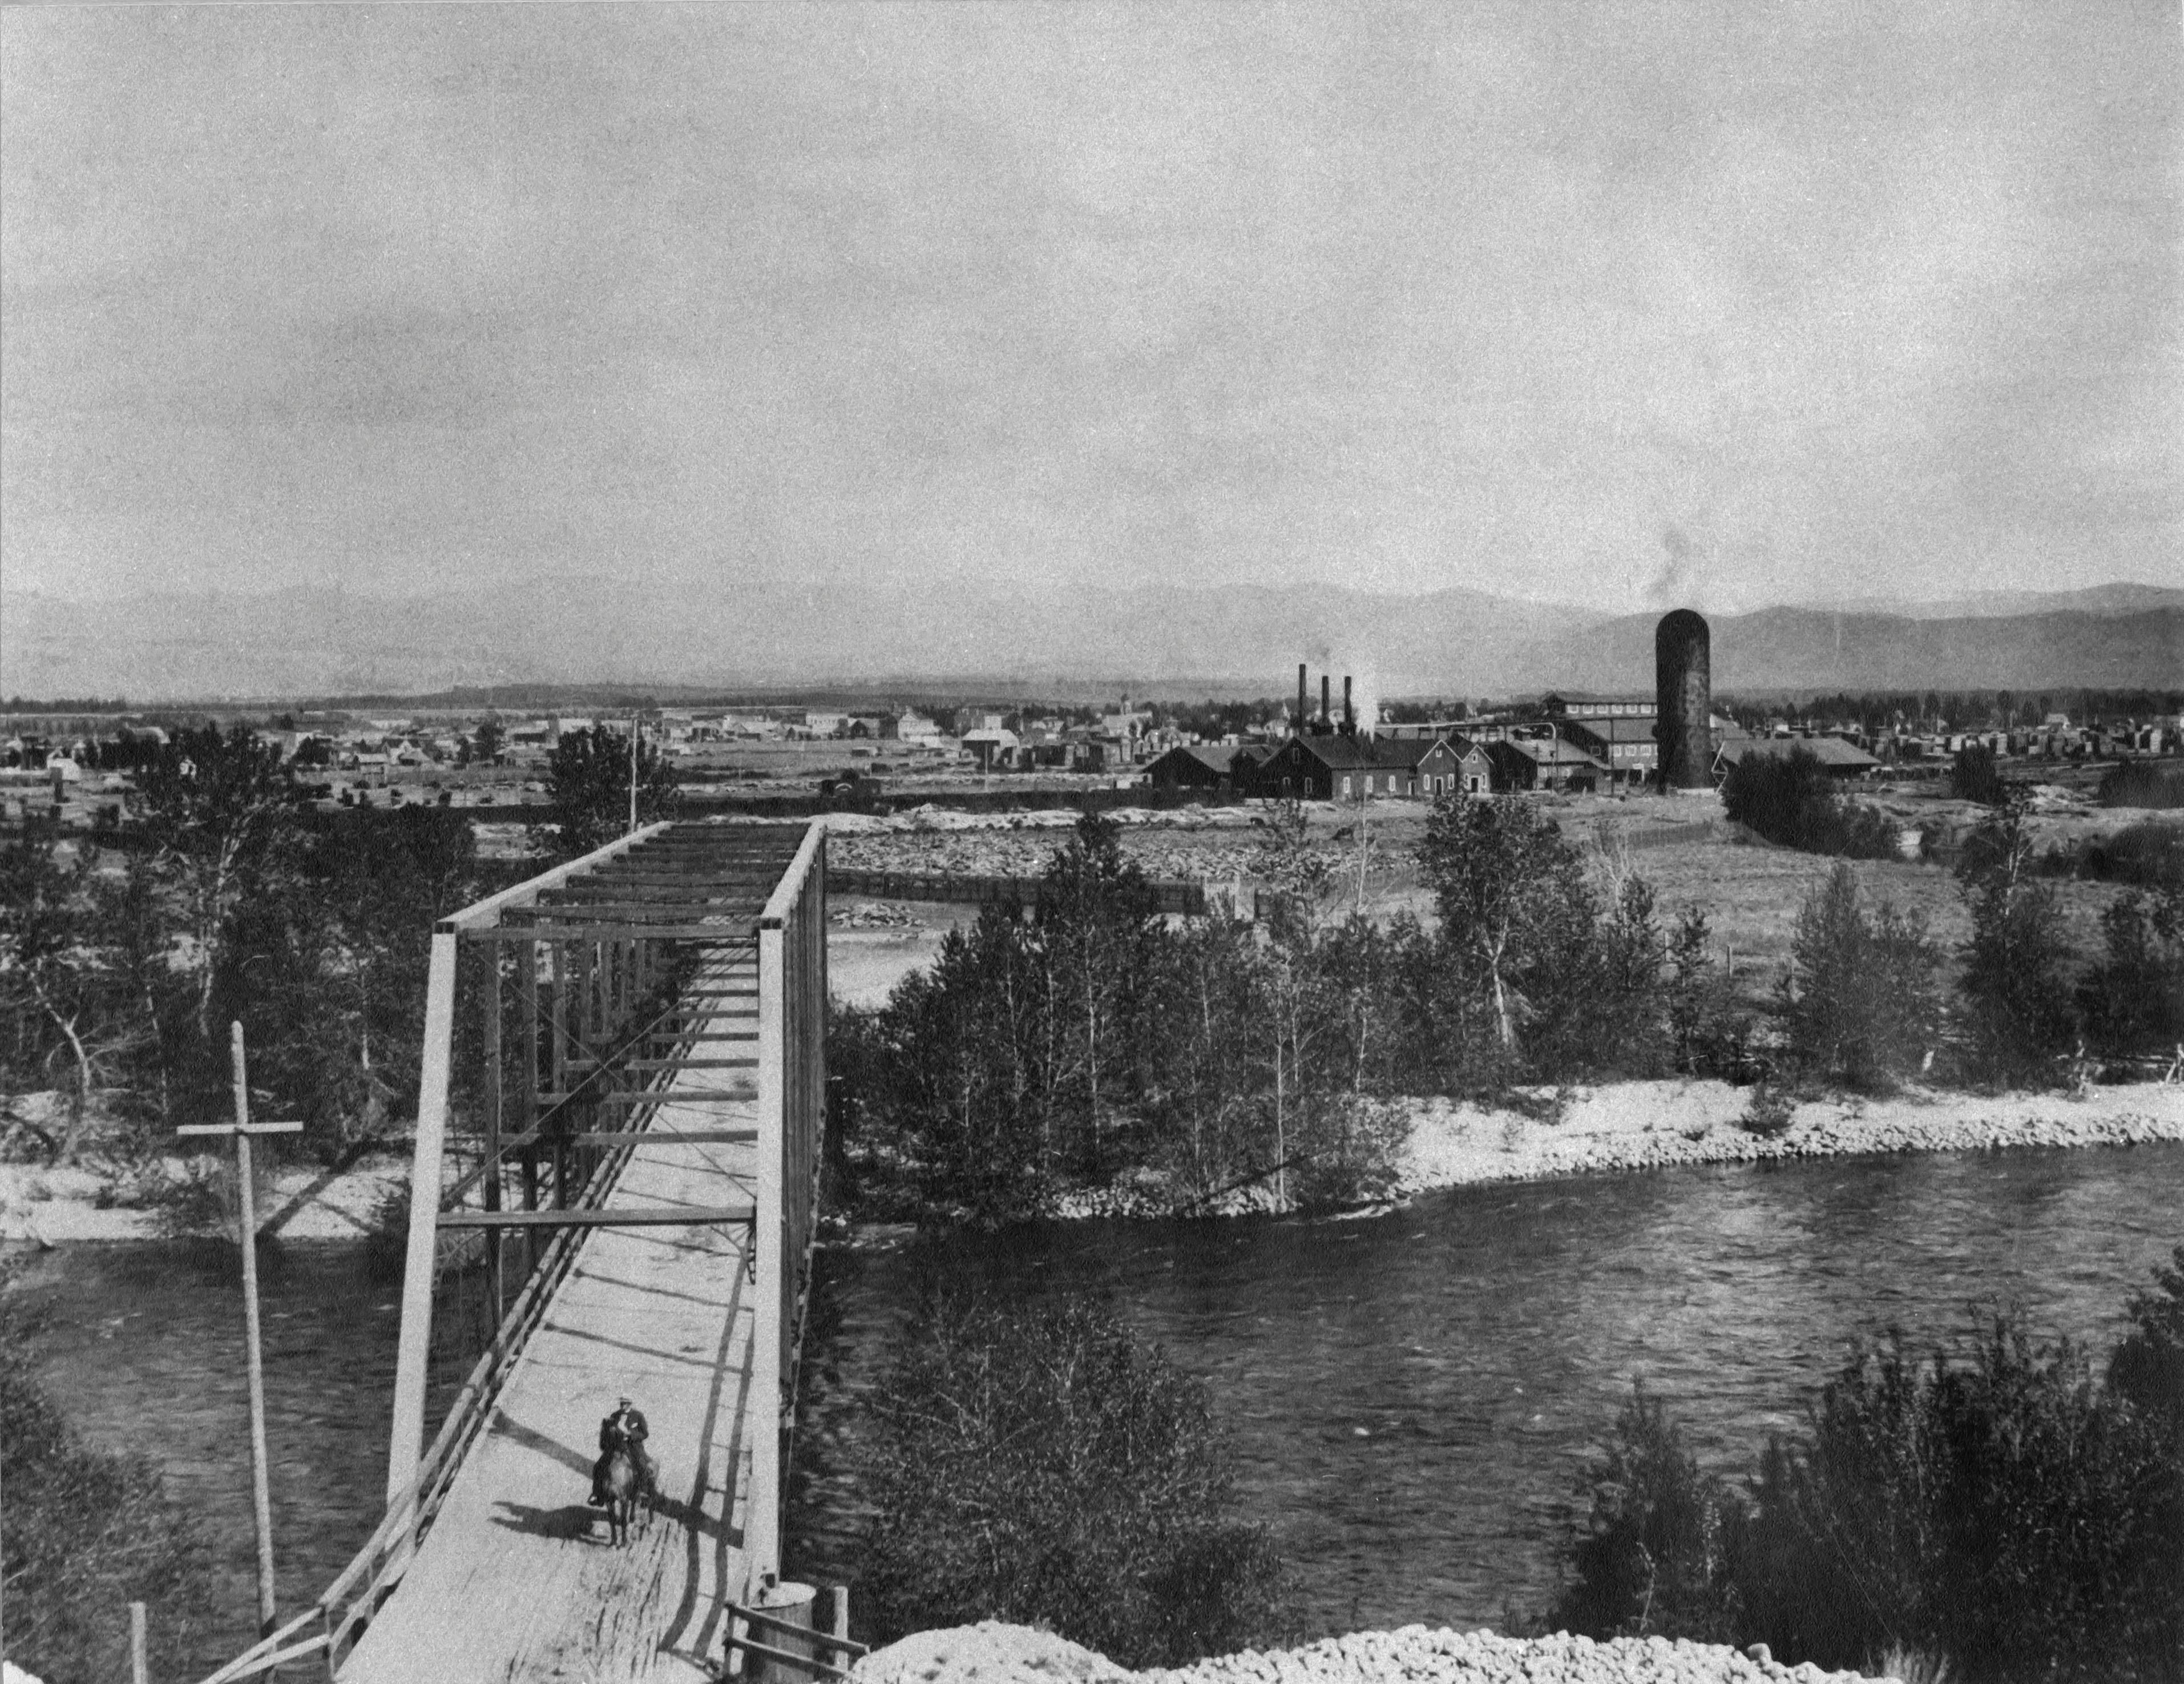 A man rides a horse over a bridge with a town in the background. Taken from some height.